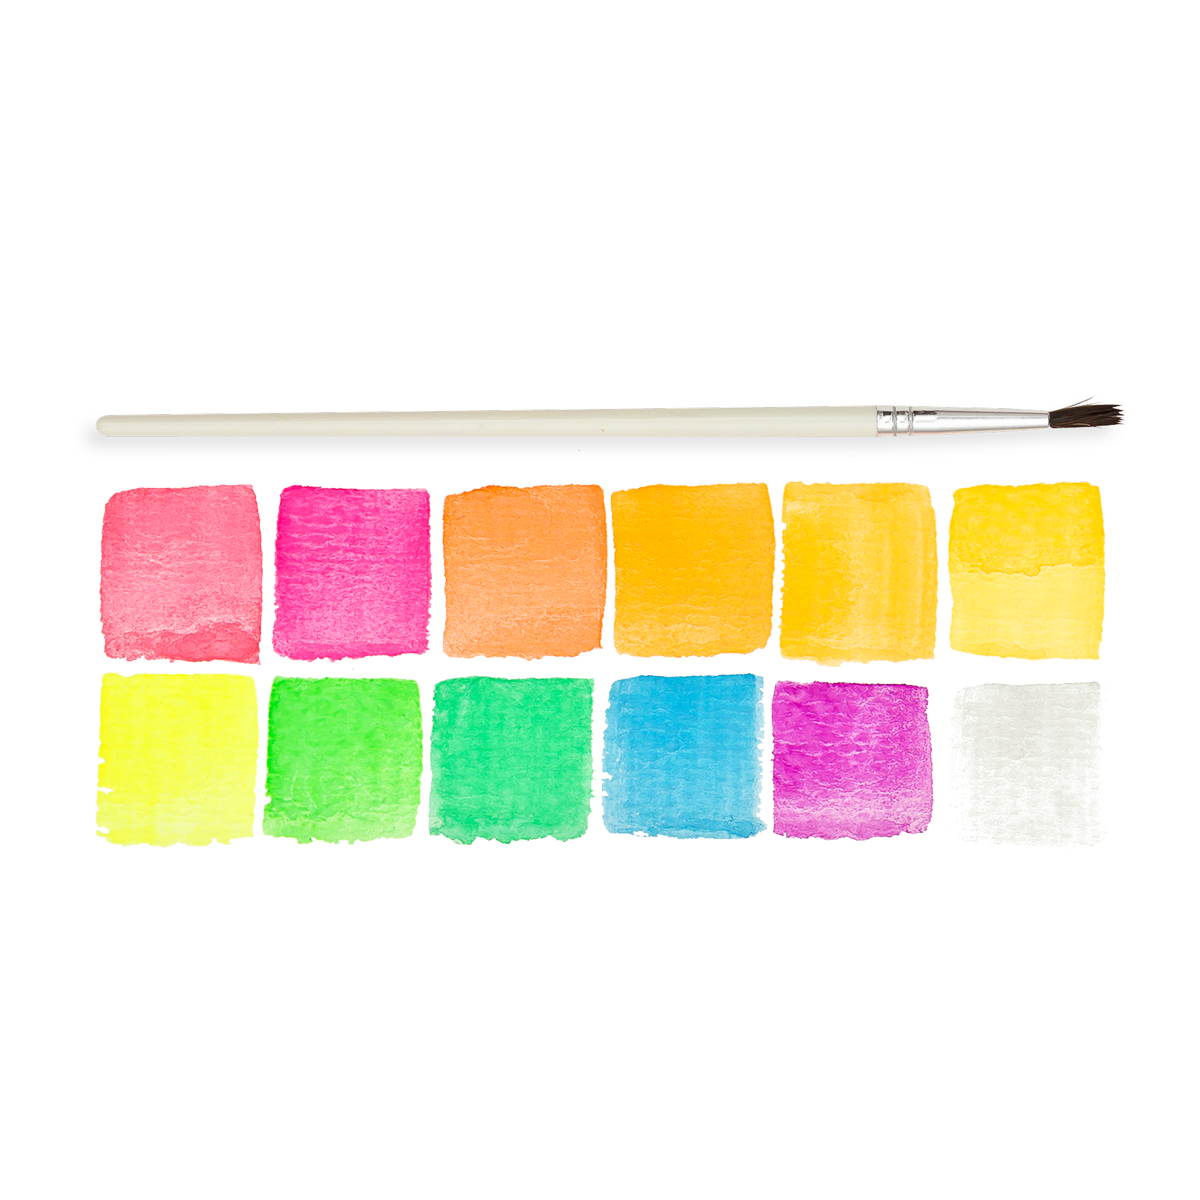 Ooly, Chroma Blends Neon Watercolor Paint Set, Watercolor Pack for Creative  Kids and Adults, Bright Neon Colors in a Portable Case, Art Supplies for